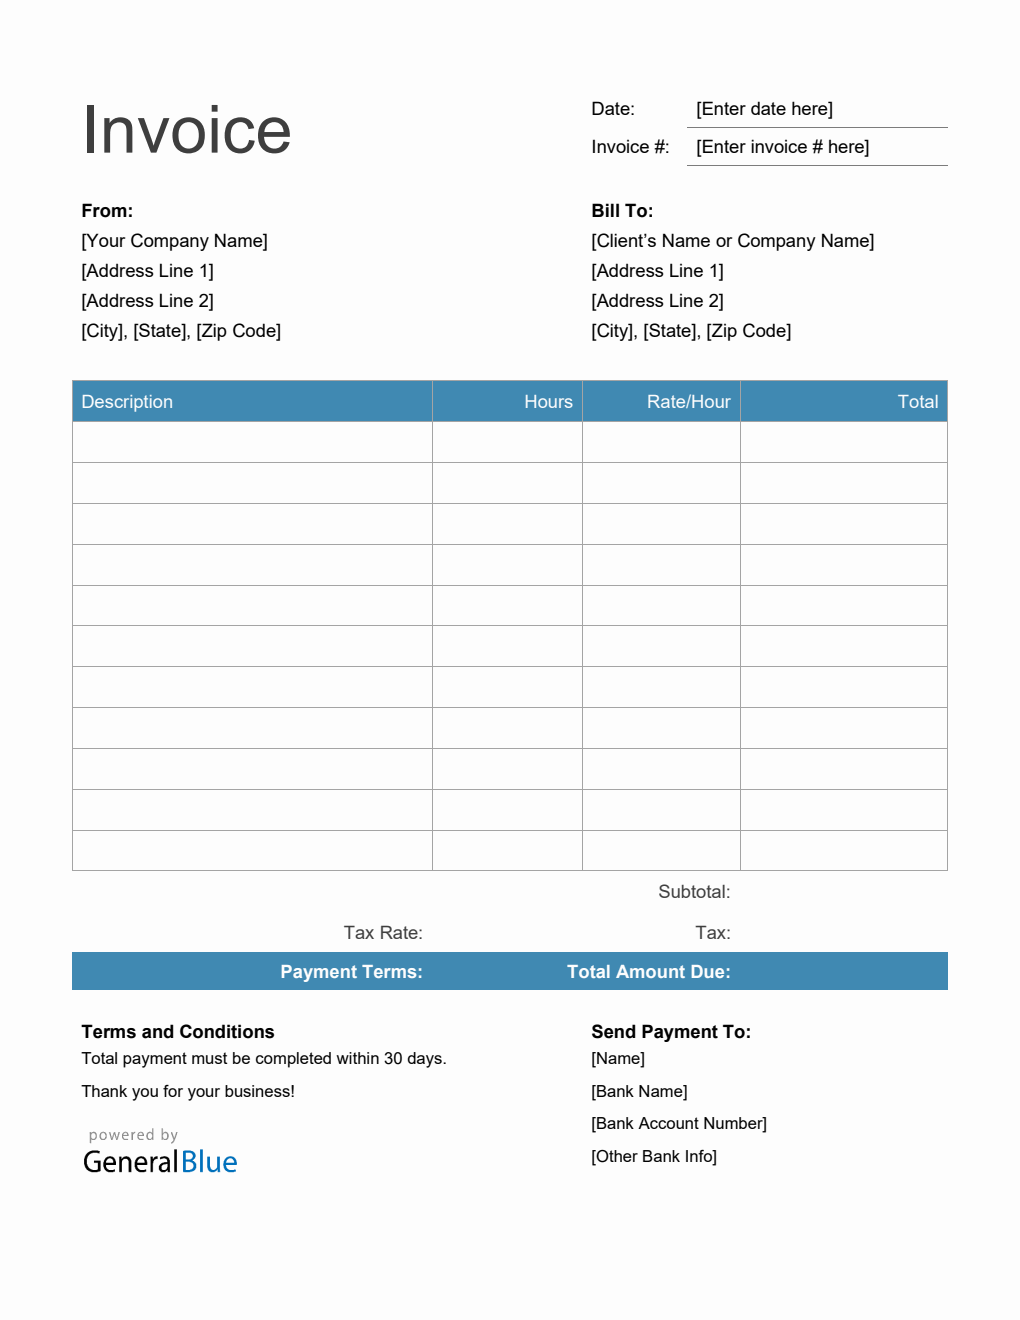 Word Invoice Template for U.S. Freelancers With Tax (Blue)